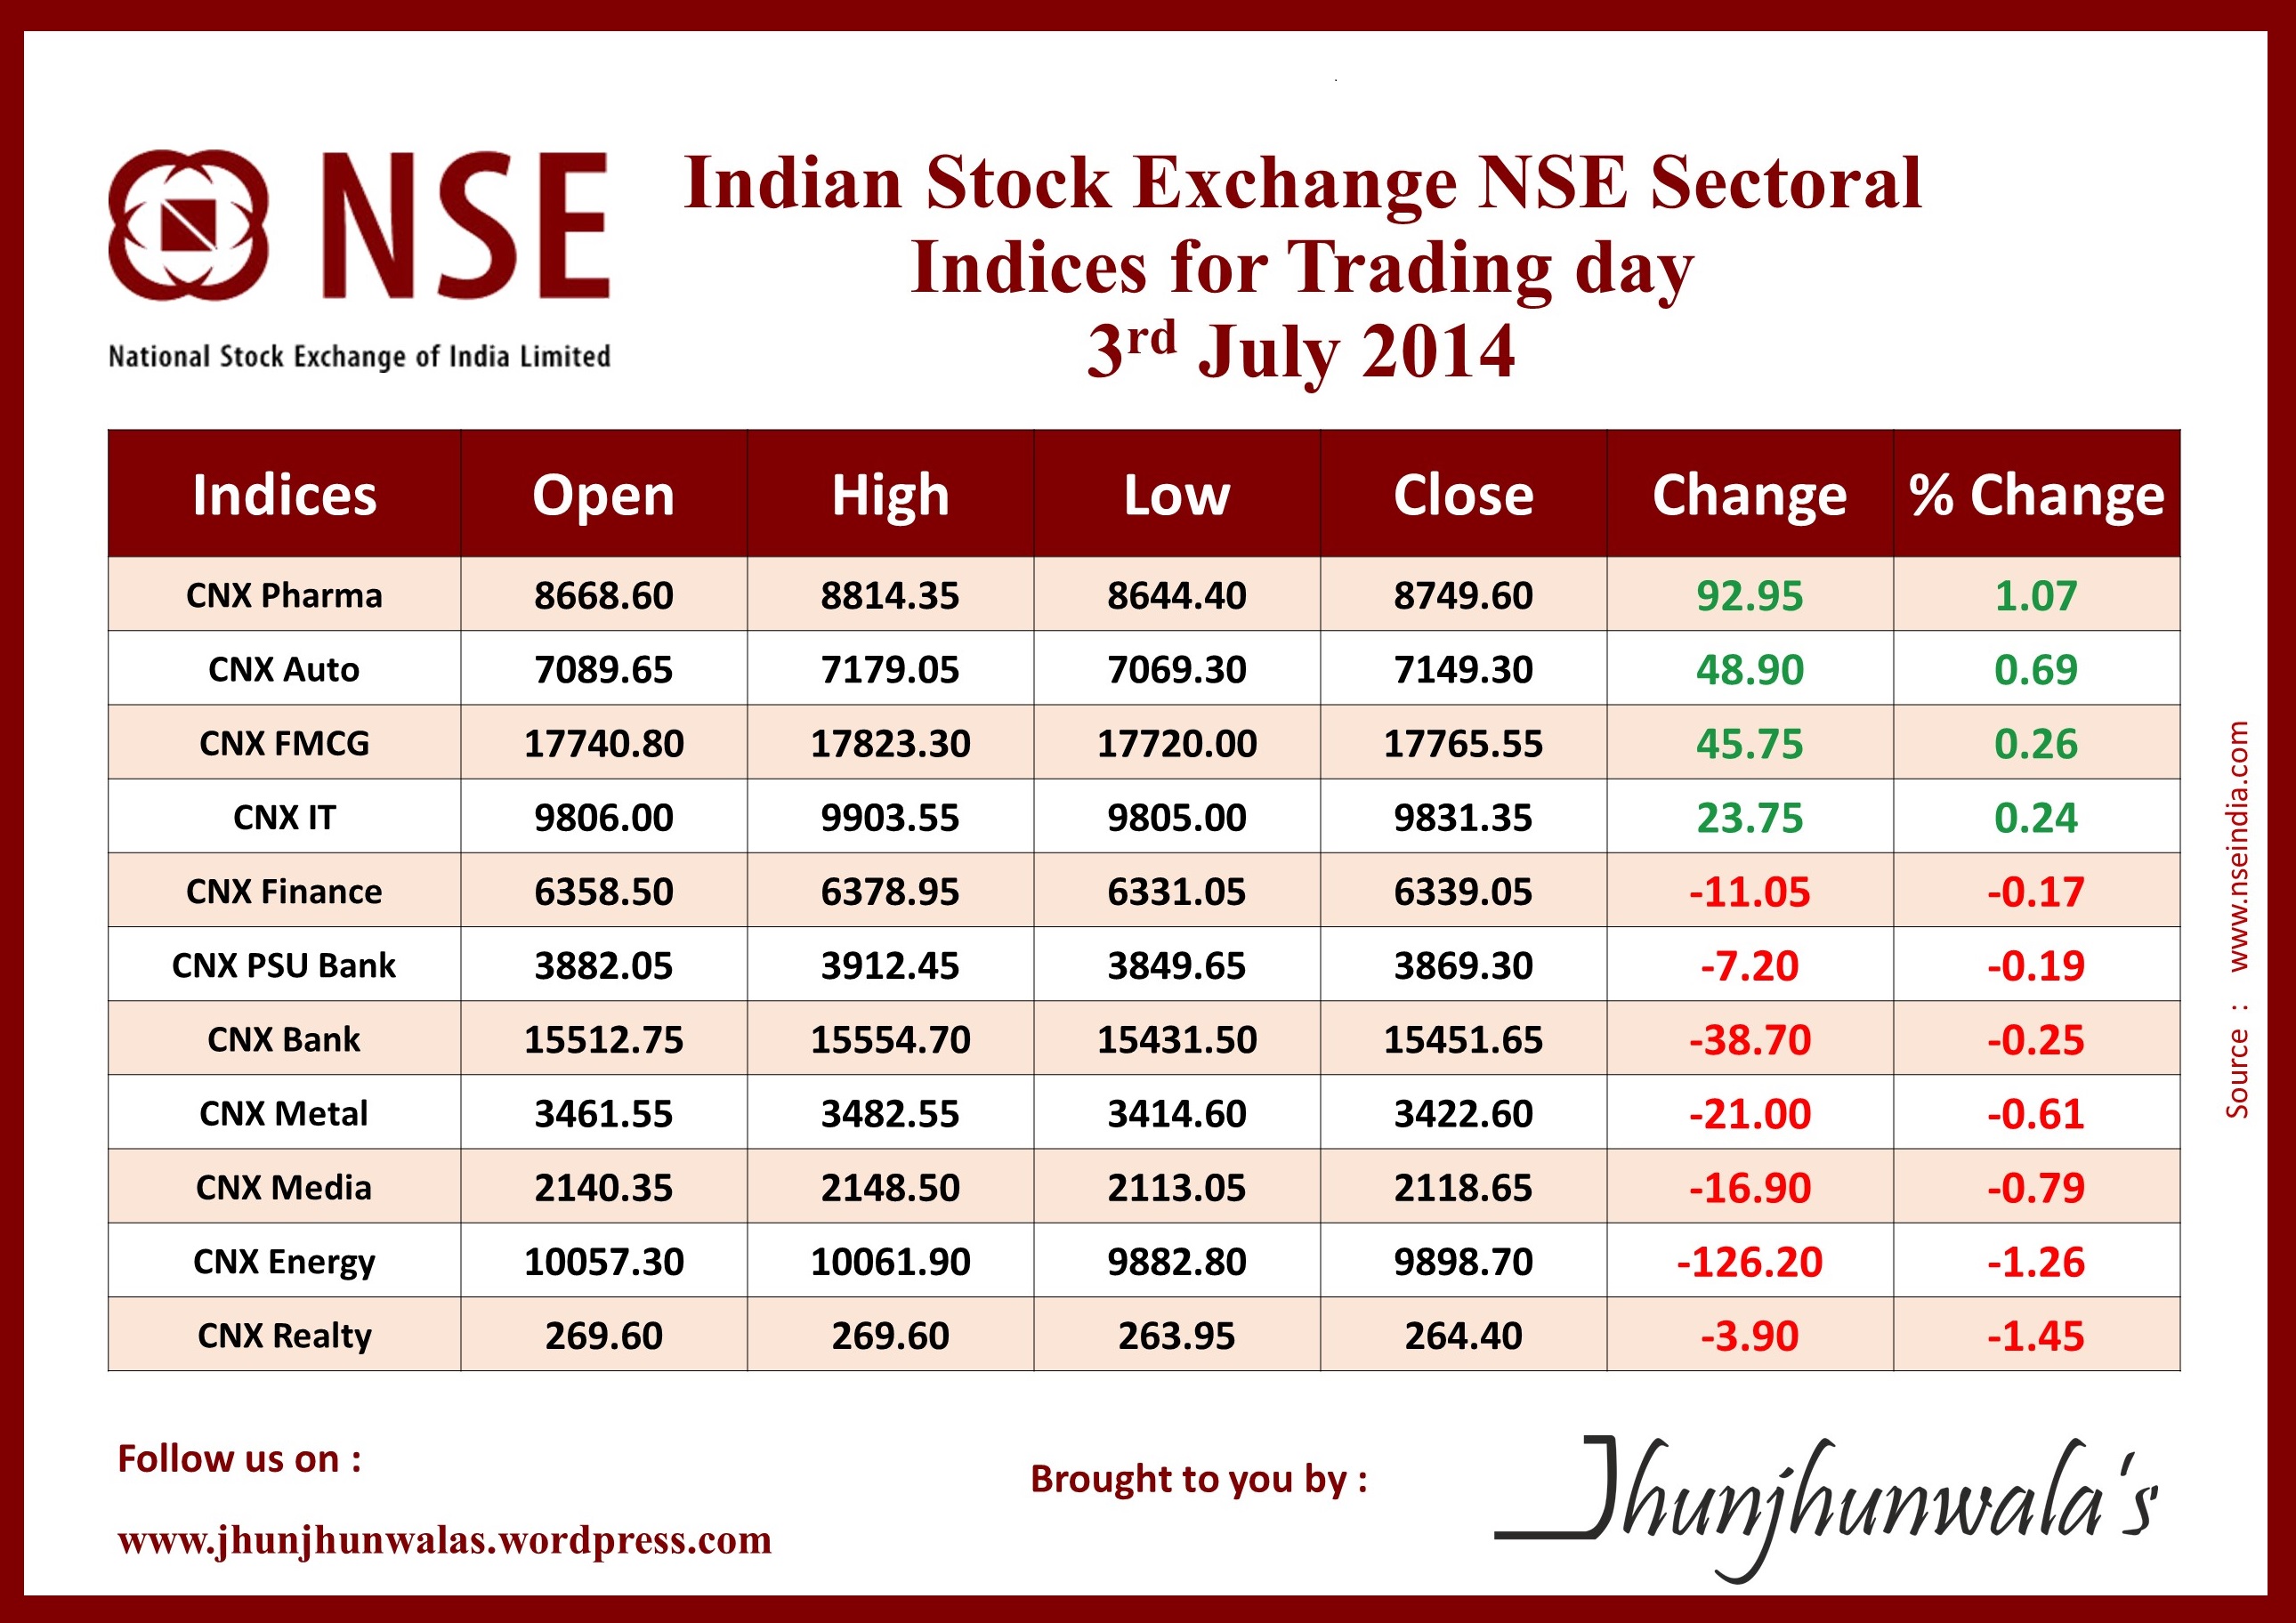 intraday trading rules nse